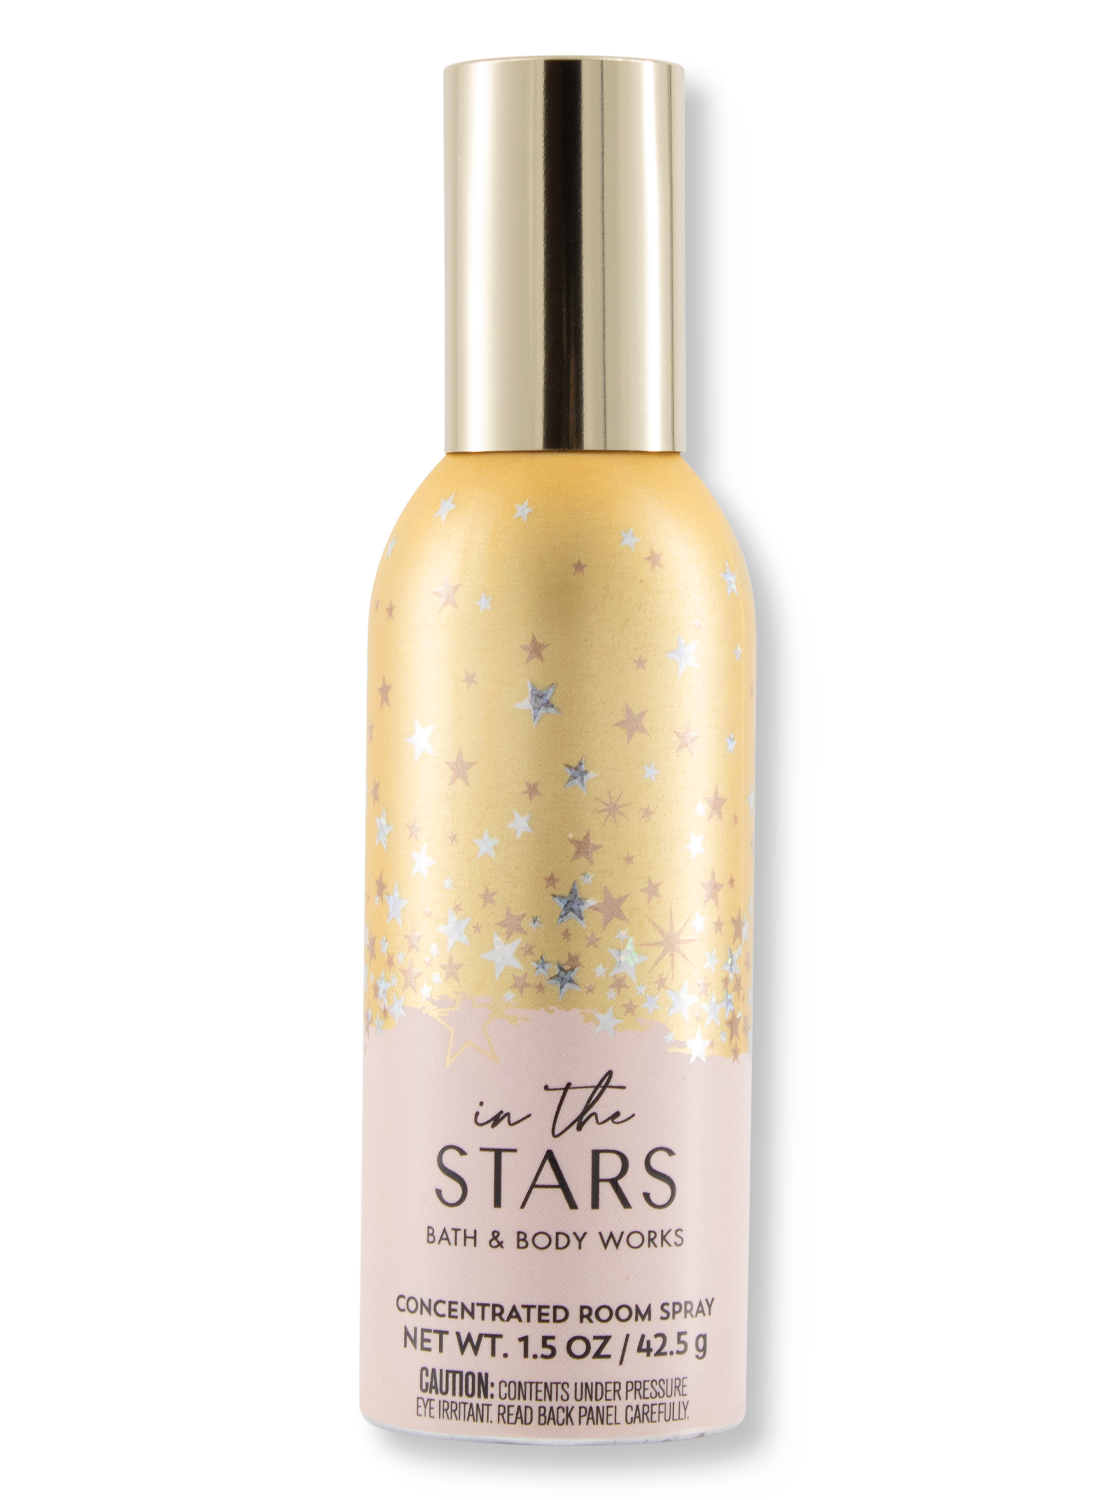 In the Stars Concentrated Room Spray